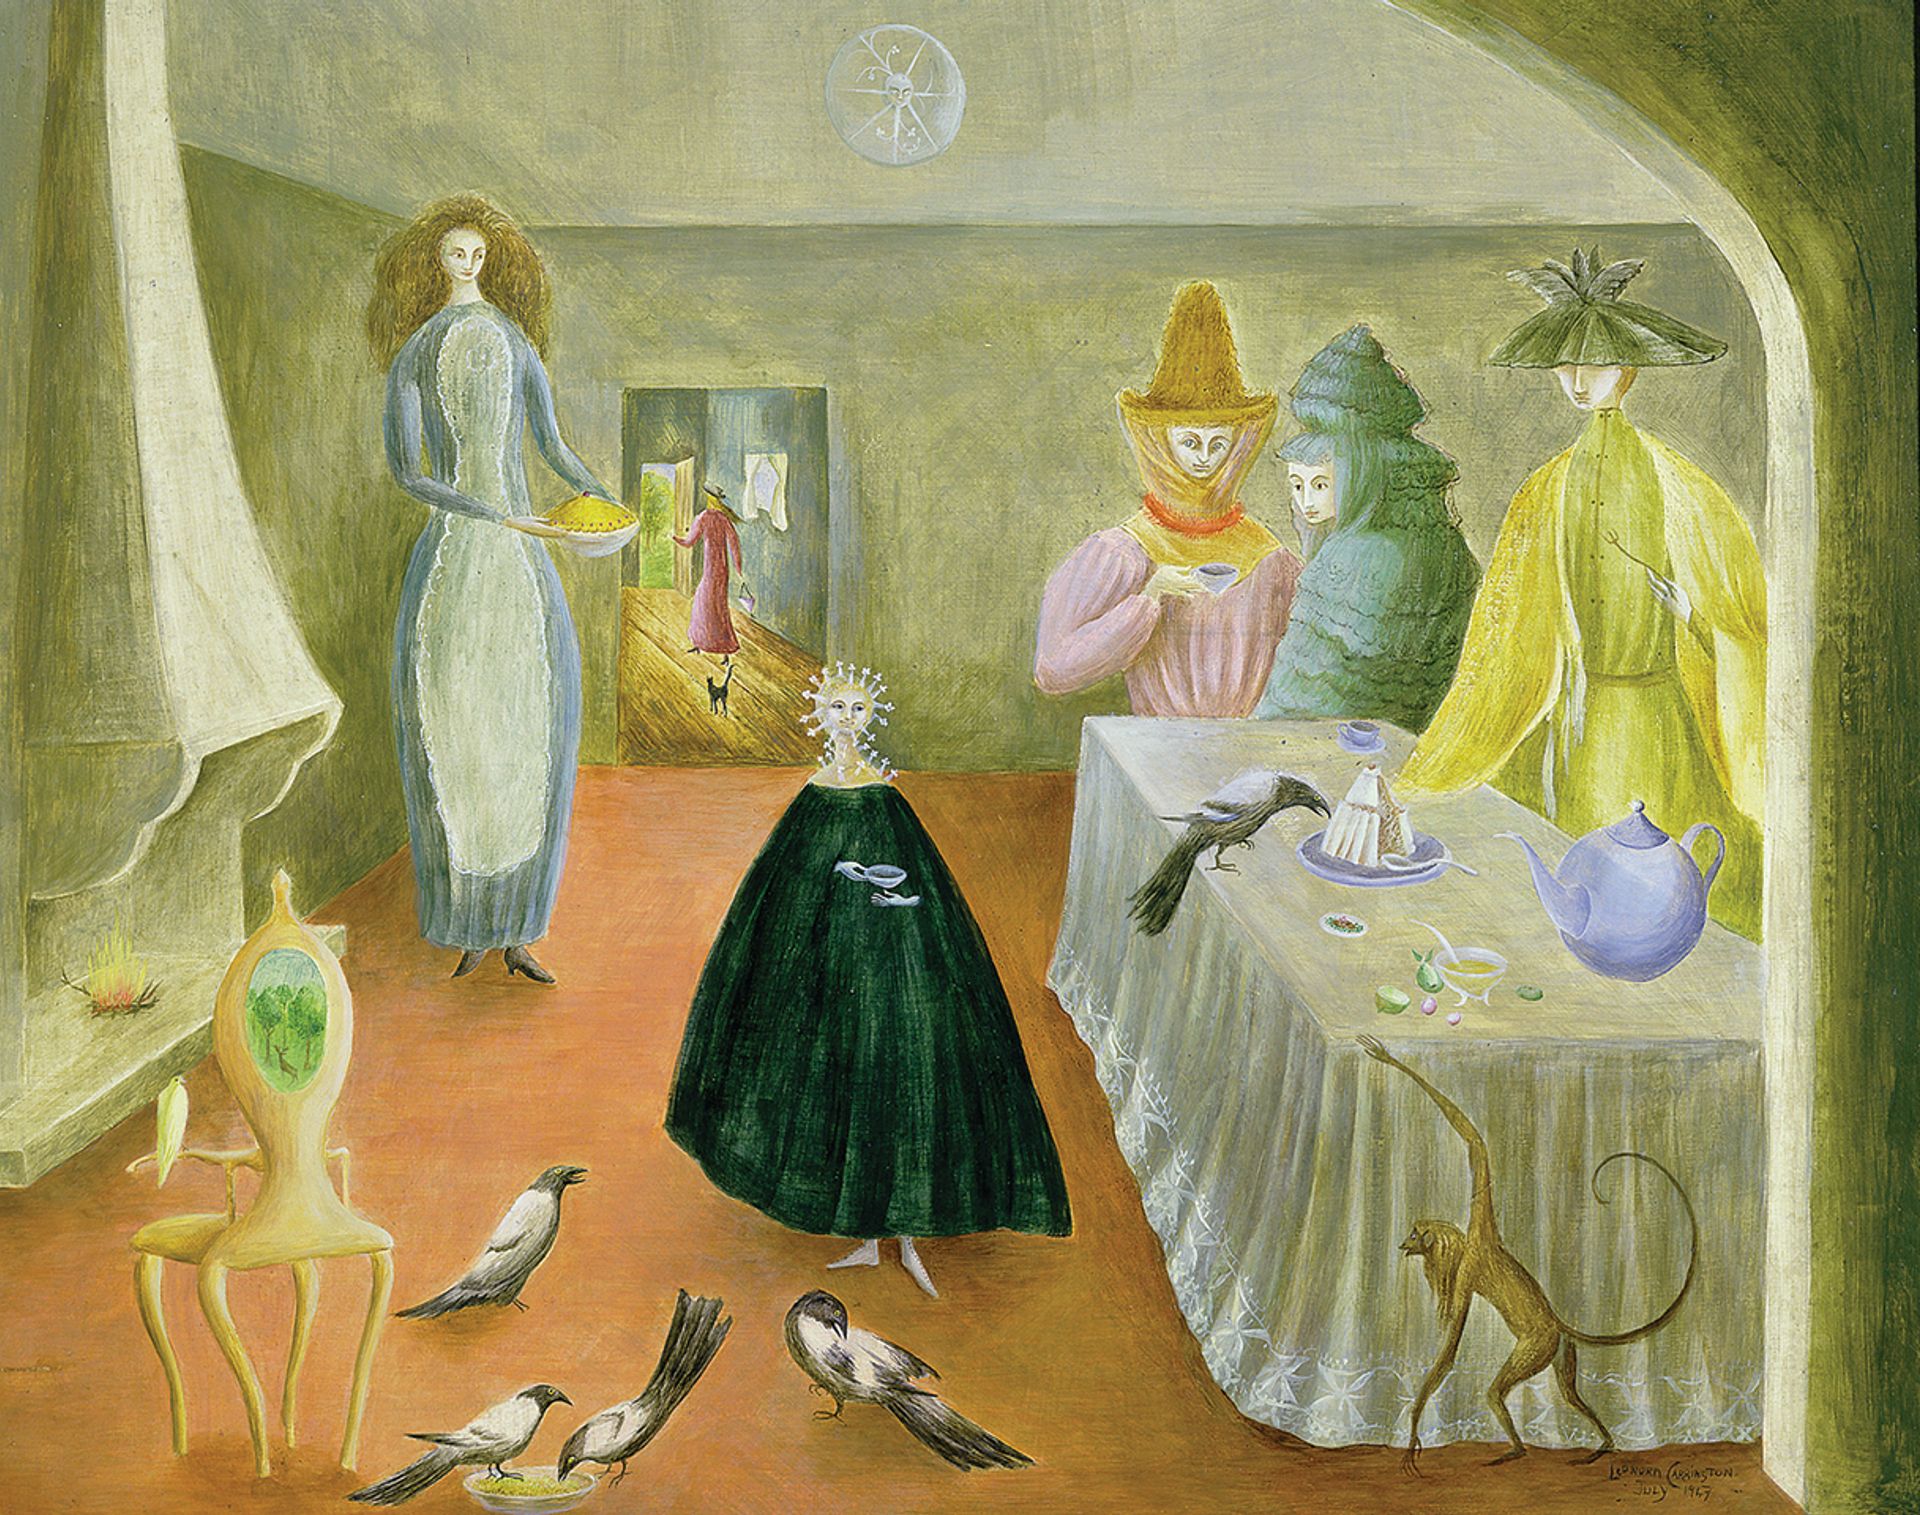 Leonora Carrington’s The Old Maids (1947) is part of a show on British Surrealism at Dulwich Picture Gallery next spring © Estate of Leonora Carrington/ARS; Photo: James Austin